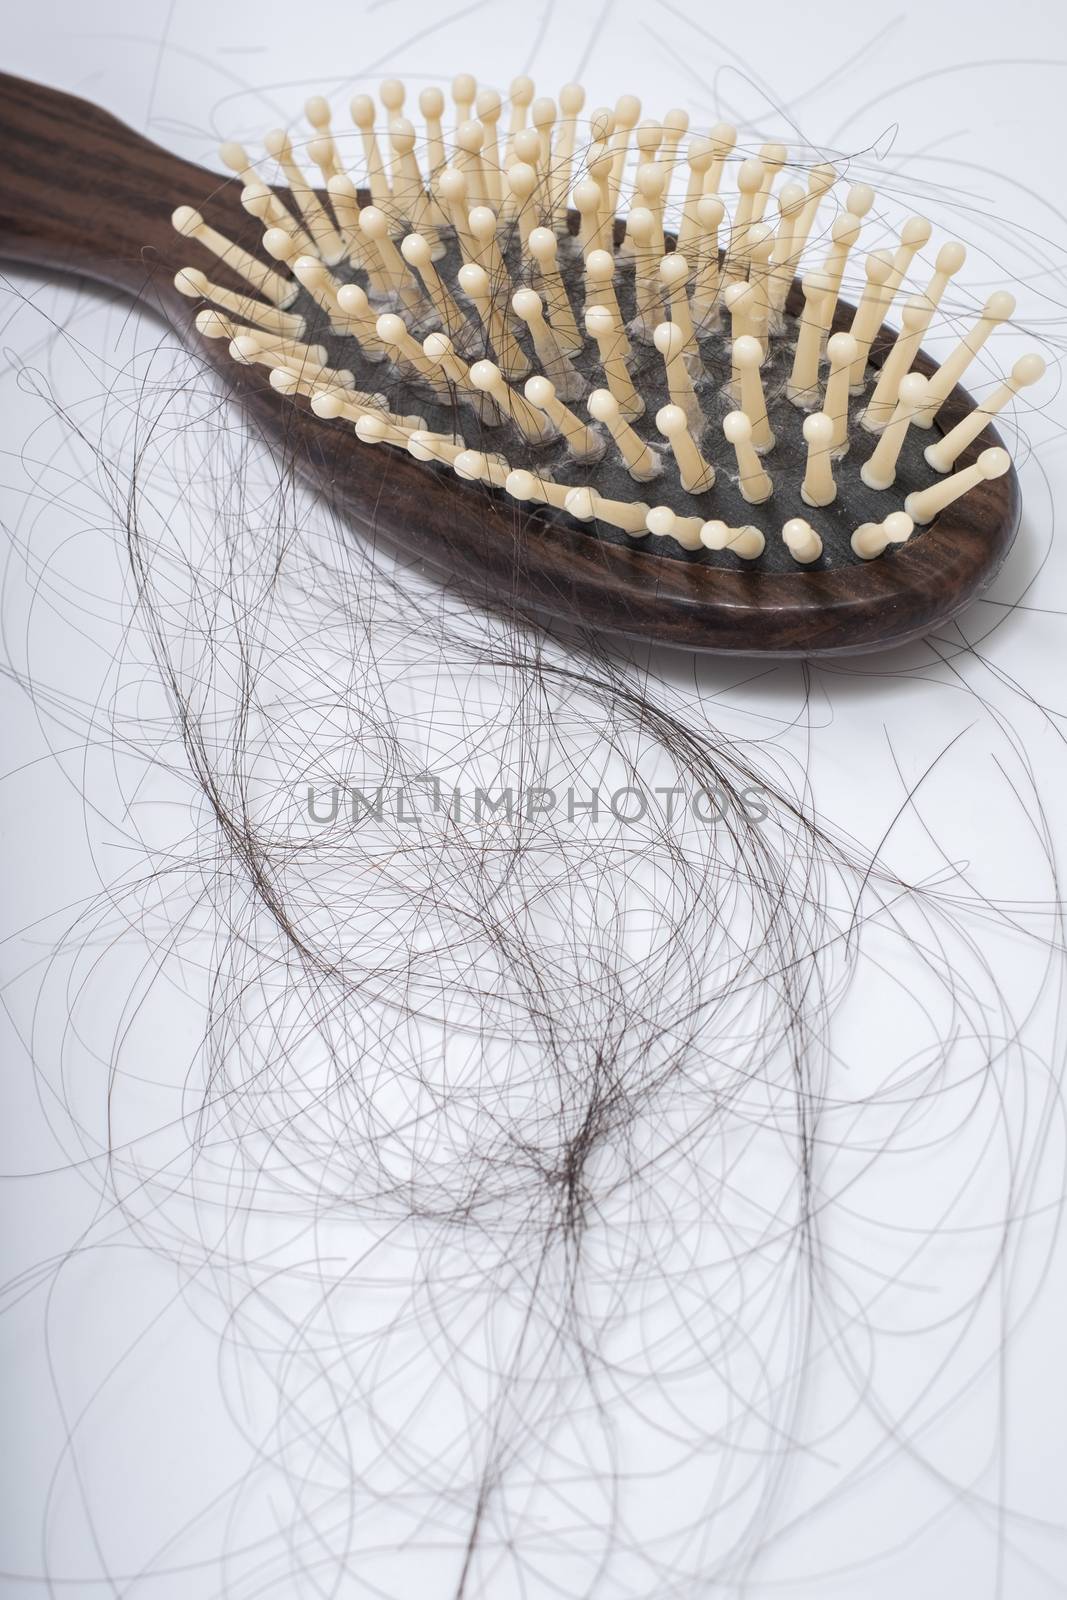 Hair loss problem on bruch, on white background by zneb076